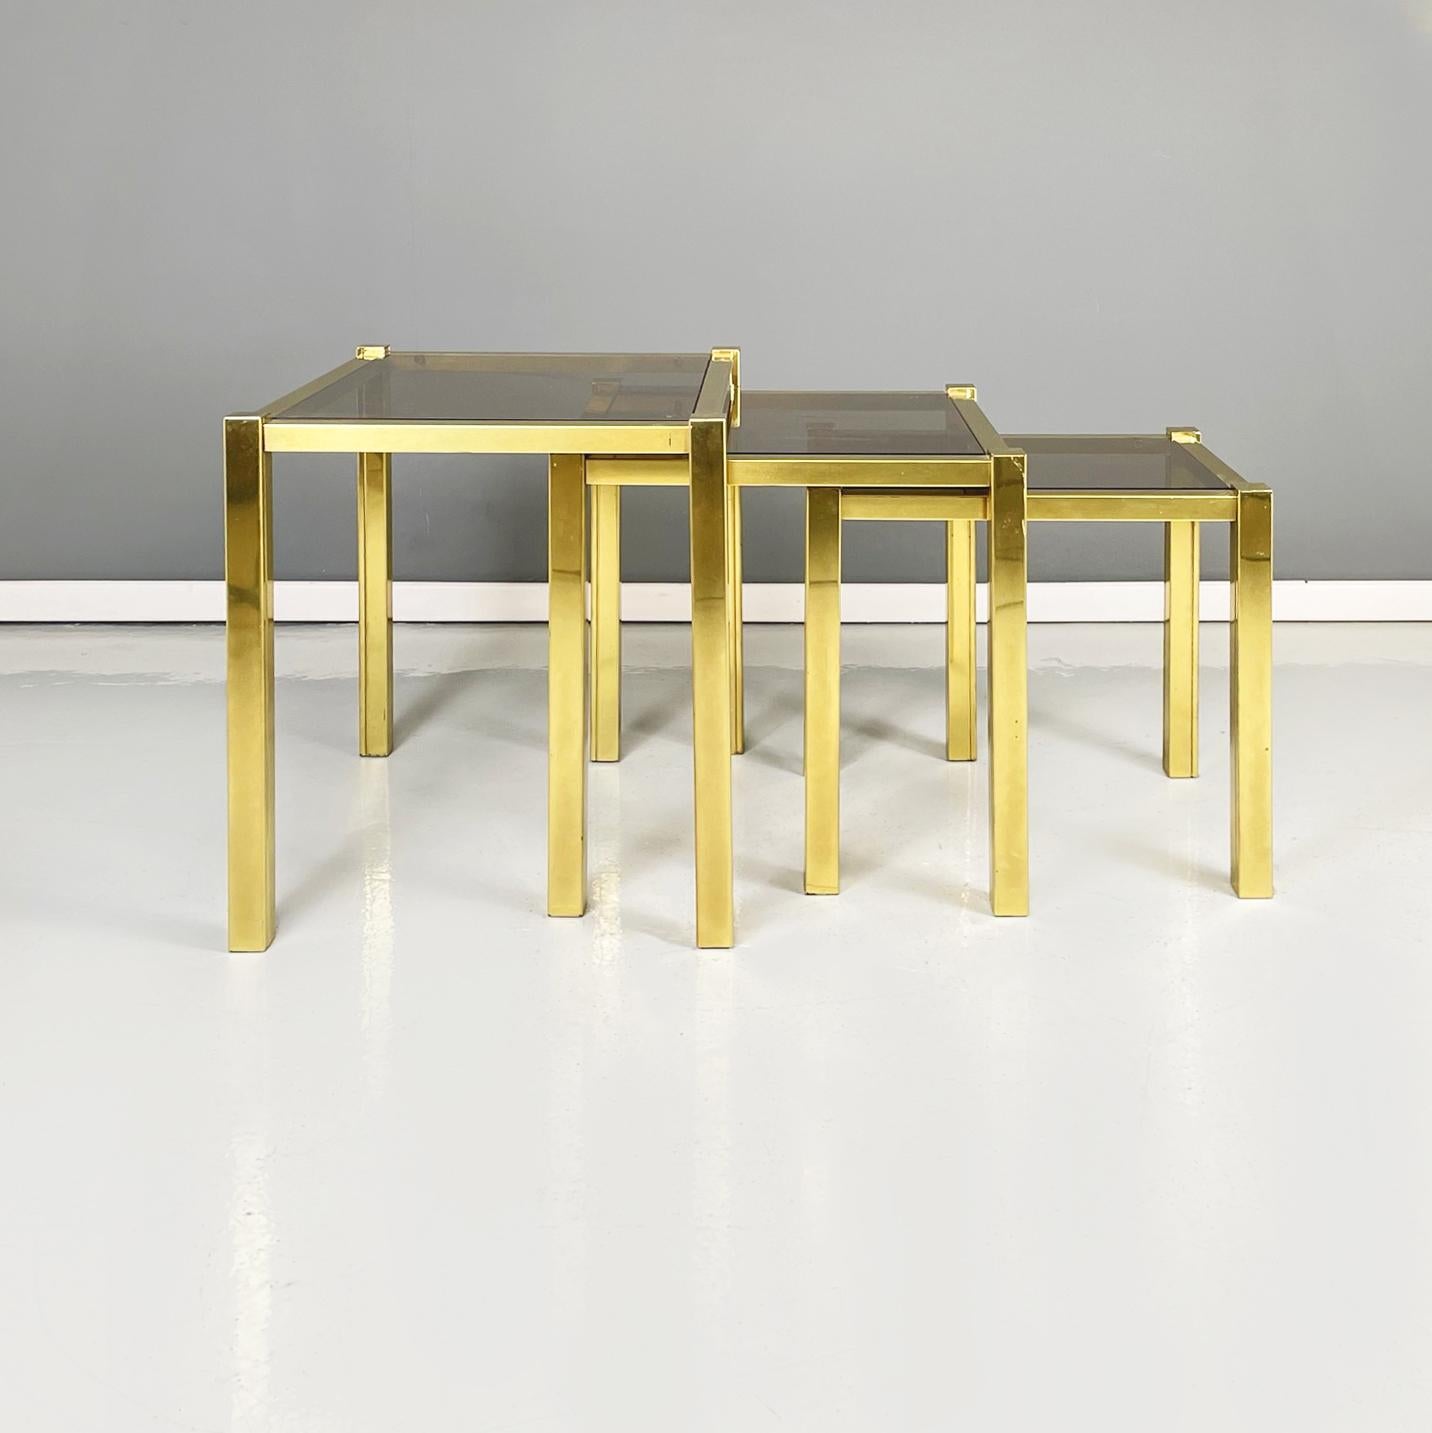 Italian modern Trio of coffee tables in brass and smoked glass, 1970s
Trio of coffee tables with rectangular tops in smoked glass. The square section structure is in brass. The tables can be inserted one inside the other.
1970s 
Very good